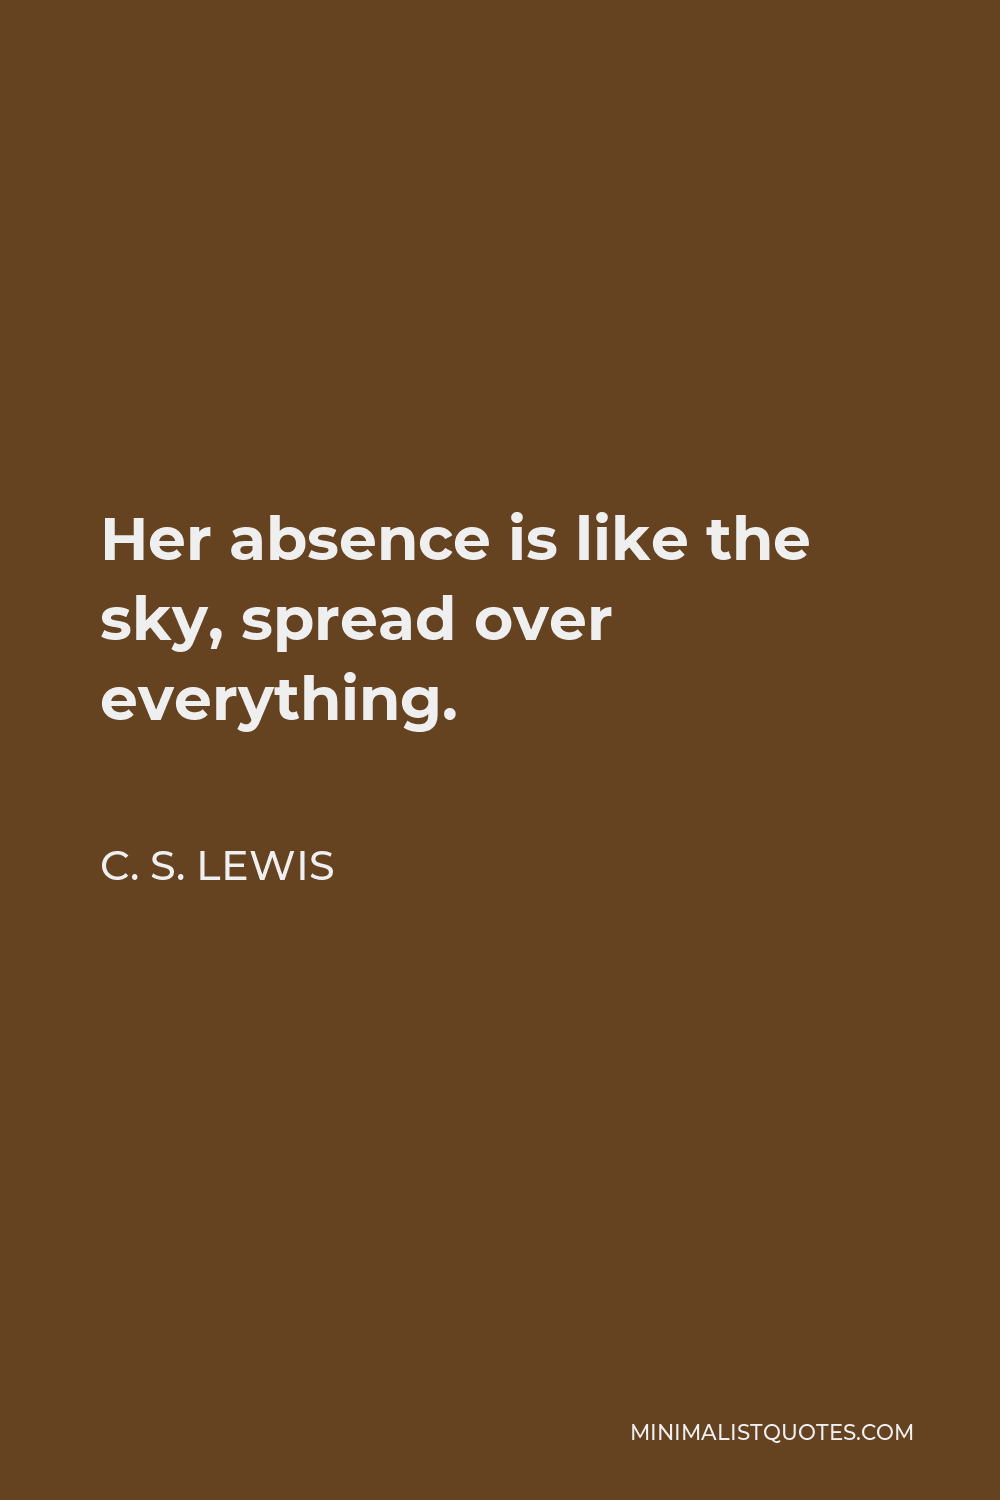 C. S. Lewis Quote - Her absence is like the sky, spread over everything.